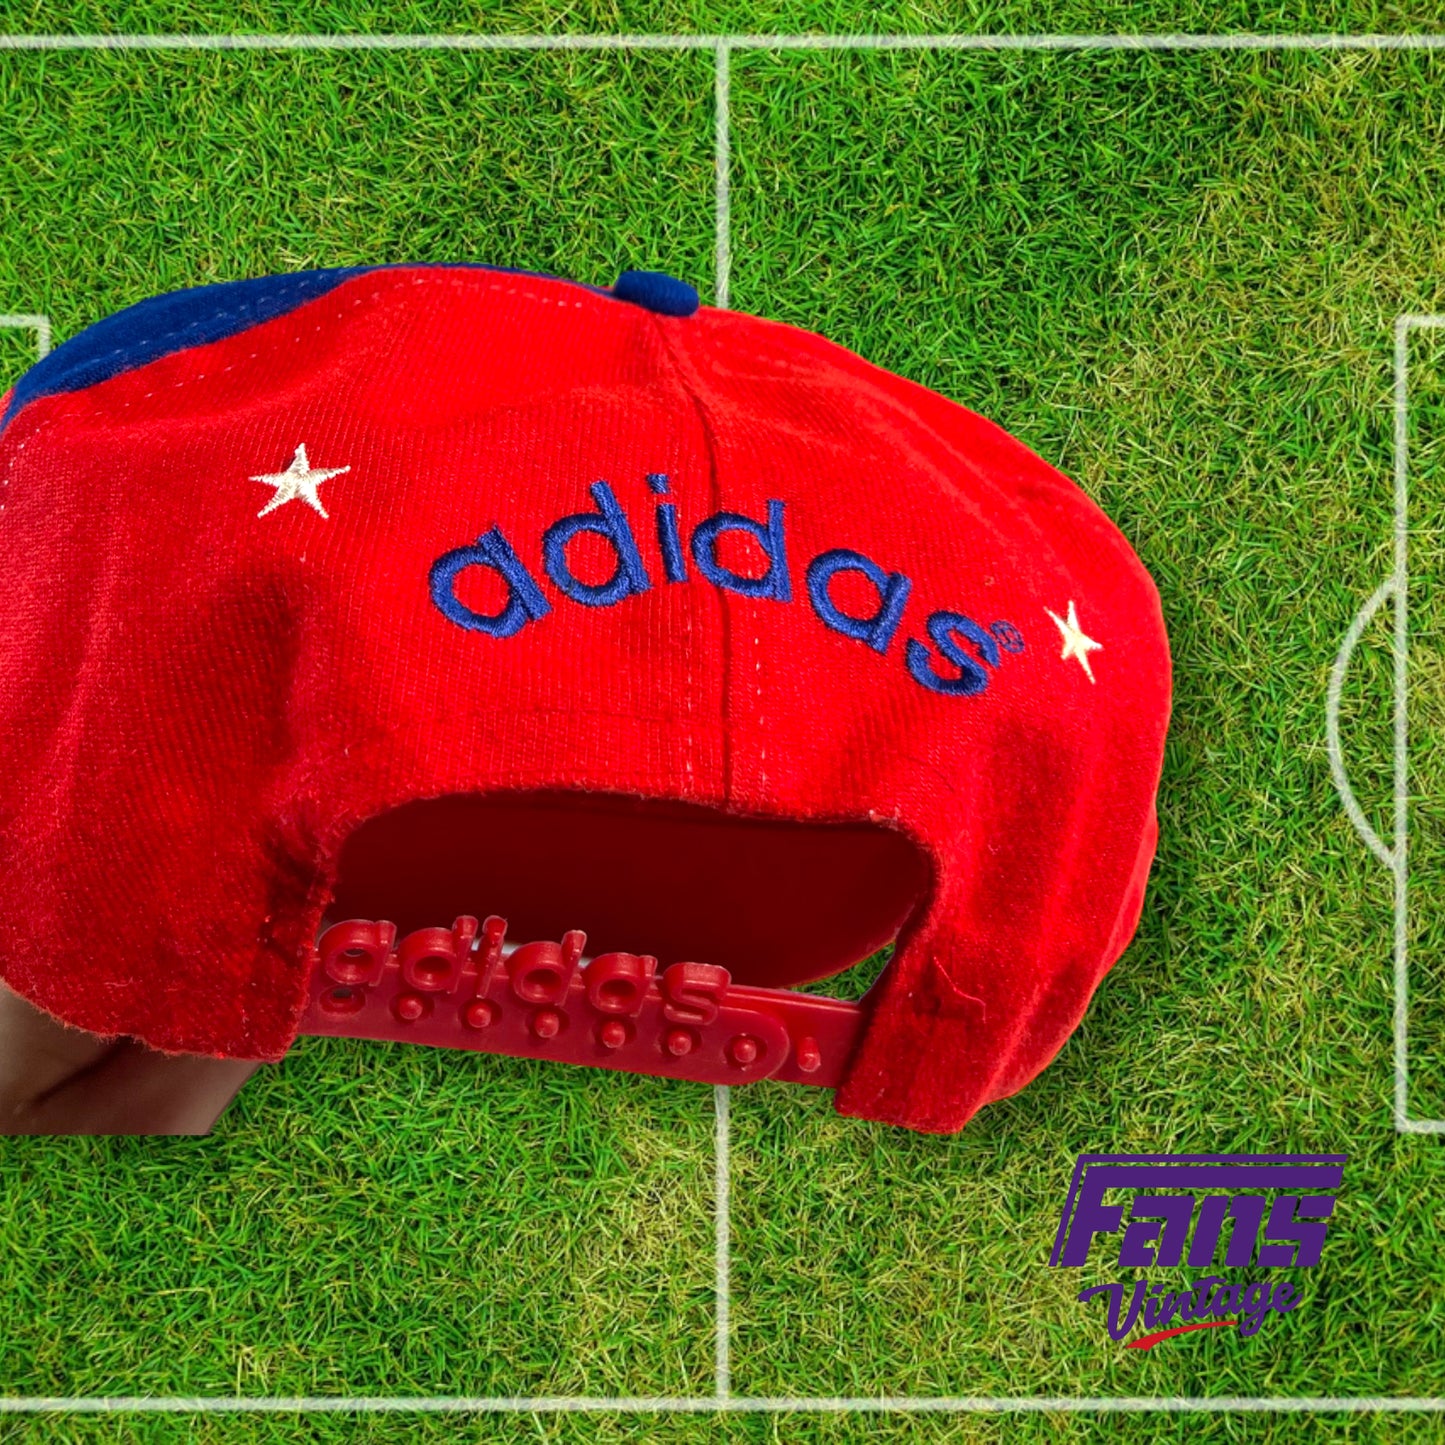 90s vintage Adidas Untied States World Cup snapback hat